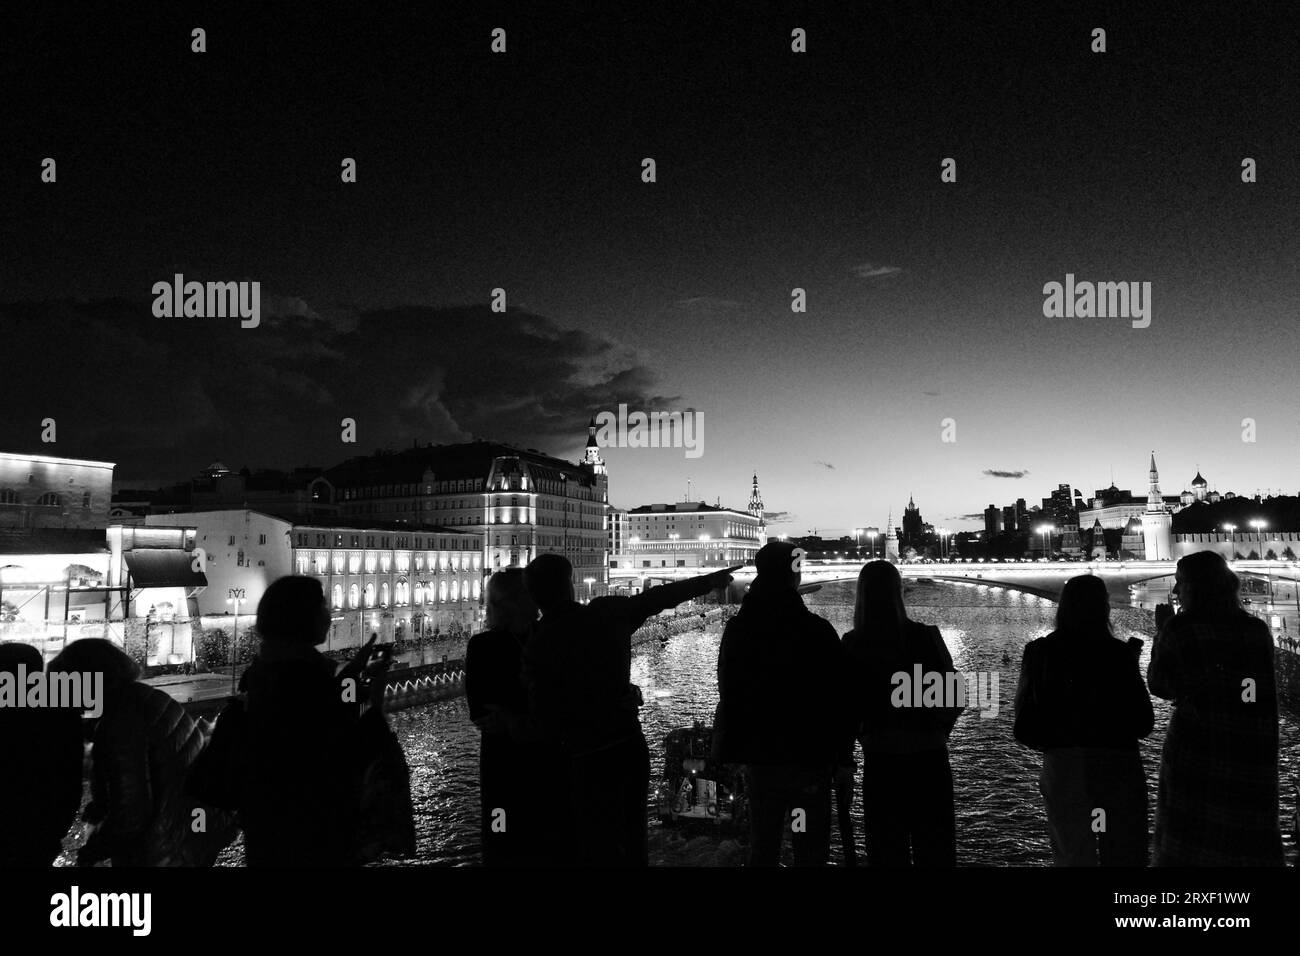 Moscow. Bridge over the Moskva River. Silhouettes of people. Evening walks and excursions. Black and white image Stock Photo